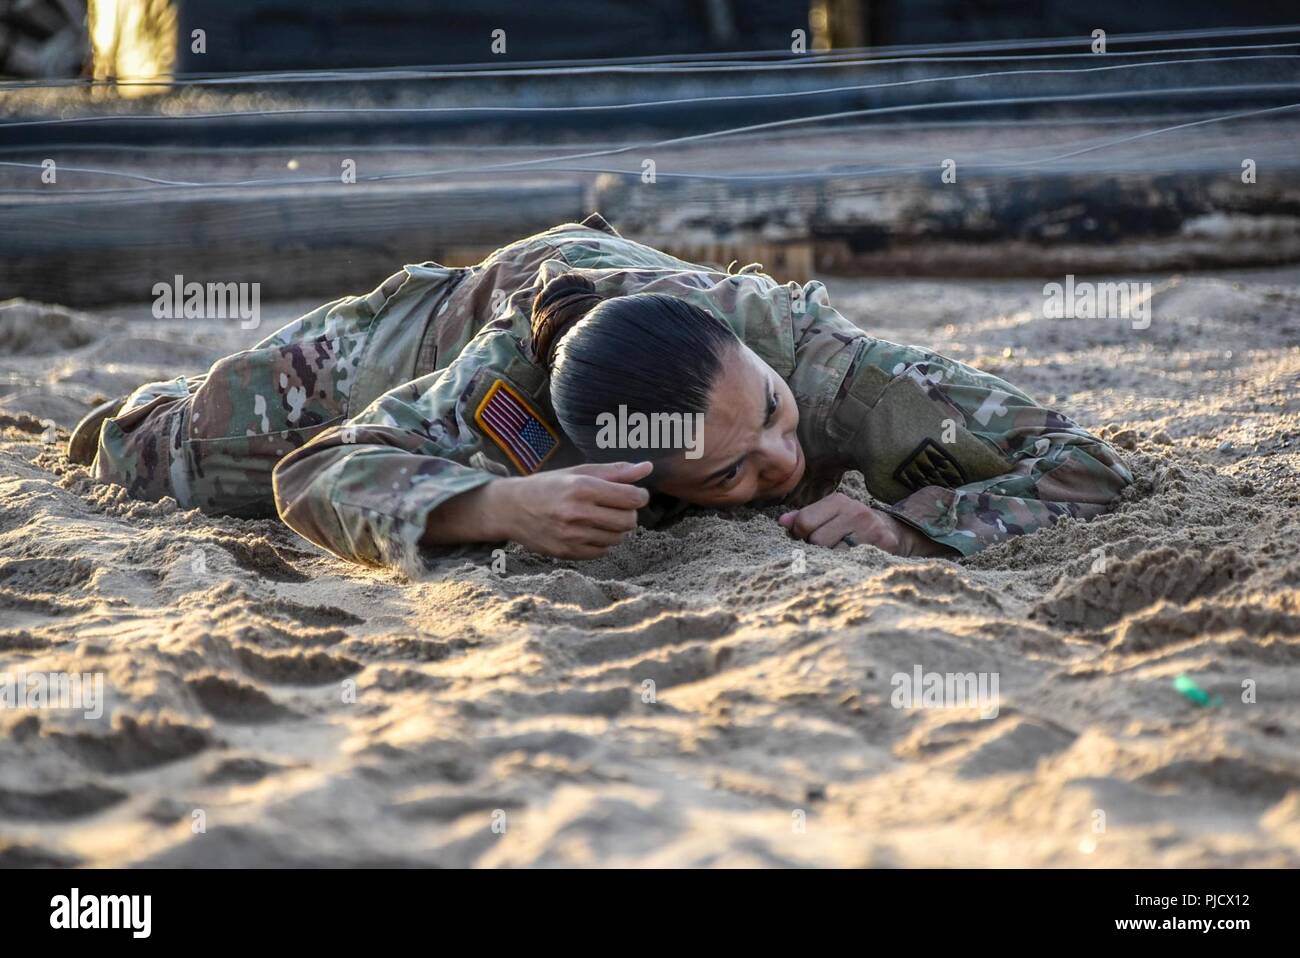 Sgt. Jasminemari Larson, a unit supply specialist for 32d AAMDC, HHB, low crawled through the sand while keeping one dead leg during the Air Assault Obstacle course July 20, 2018. (By Sgt. La’Shawna Custom, 32d AAMDC Public Affairs NCO) Stock Photo